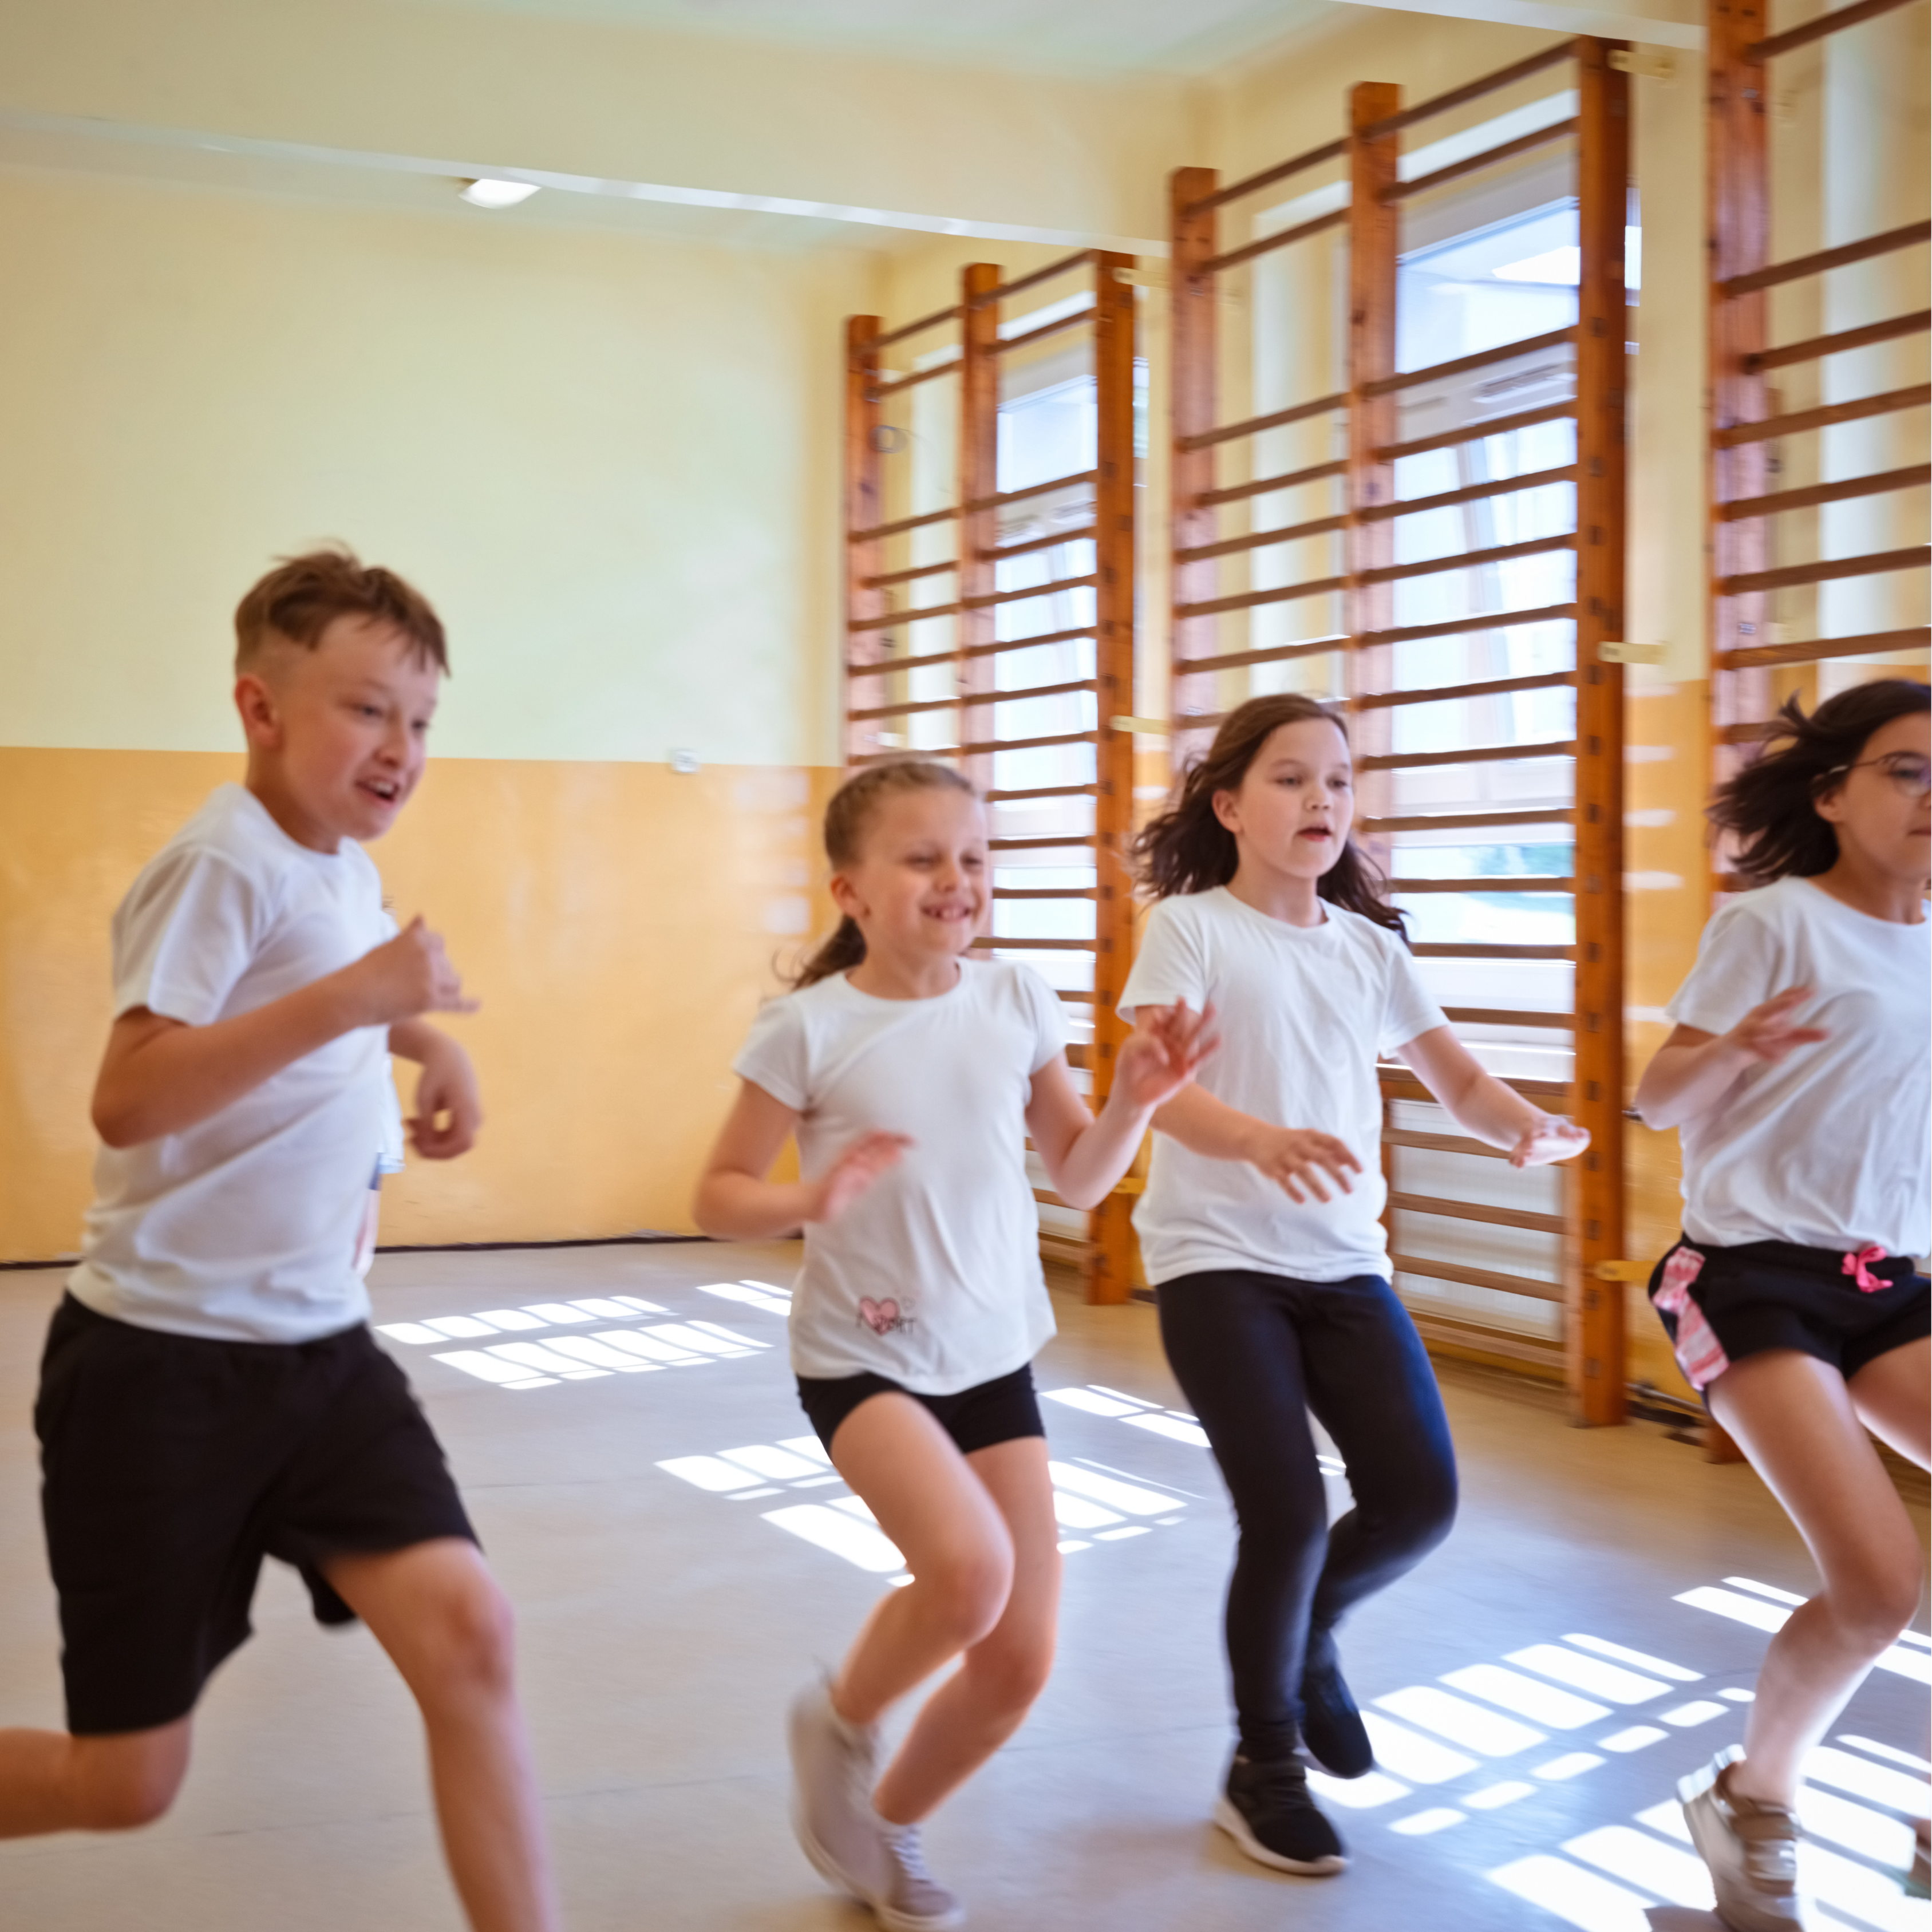 Wild Seafood and Physical Fitness: Fueling Active School Lives